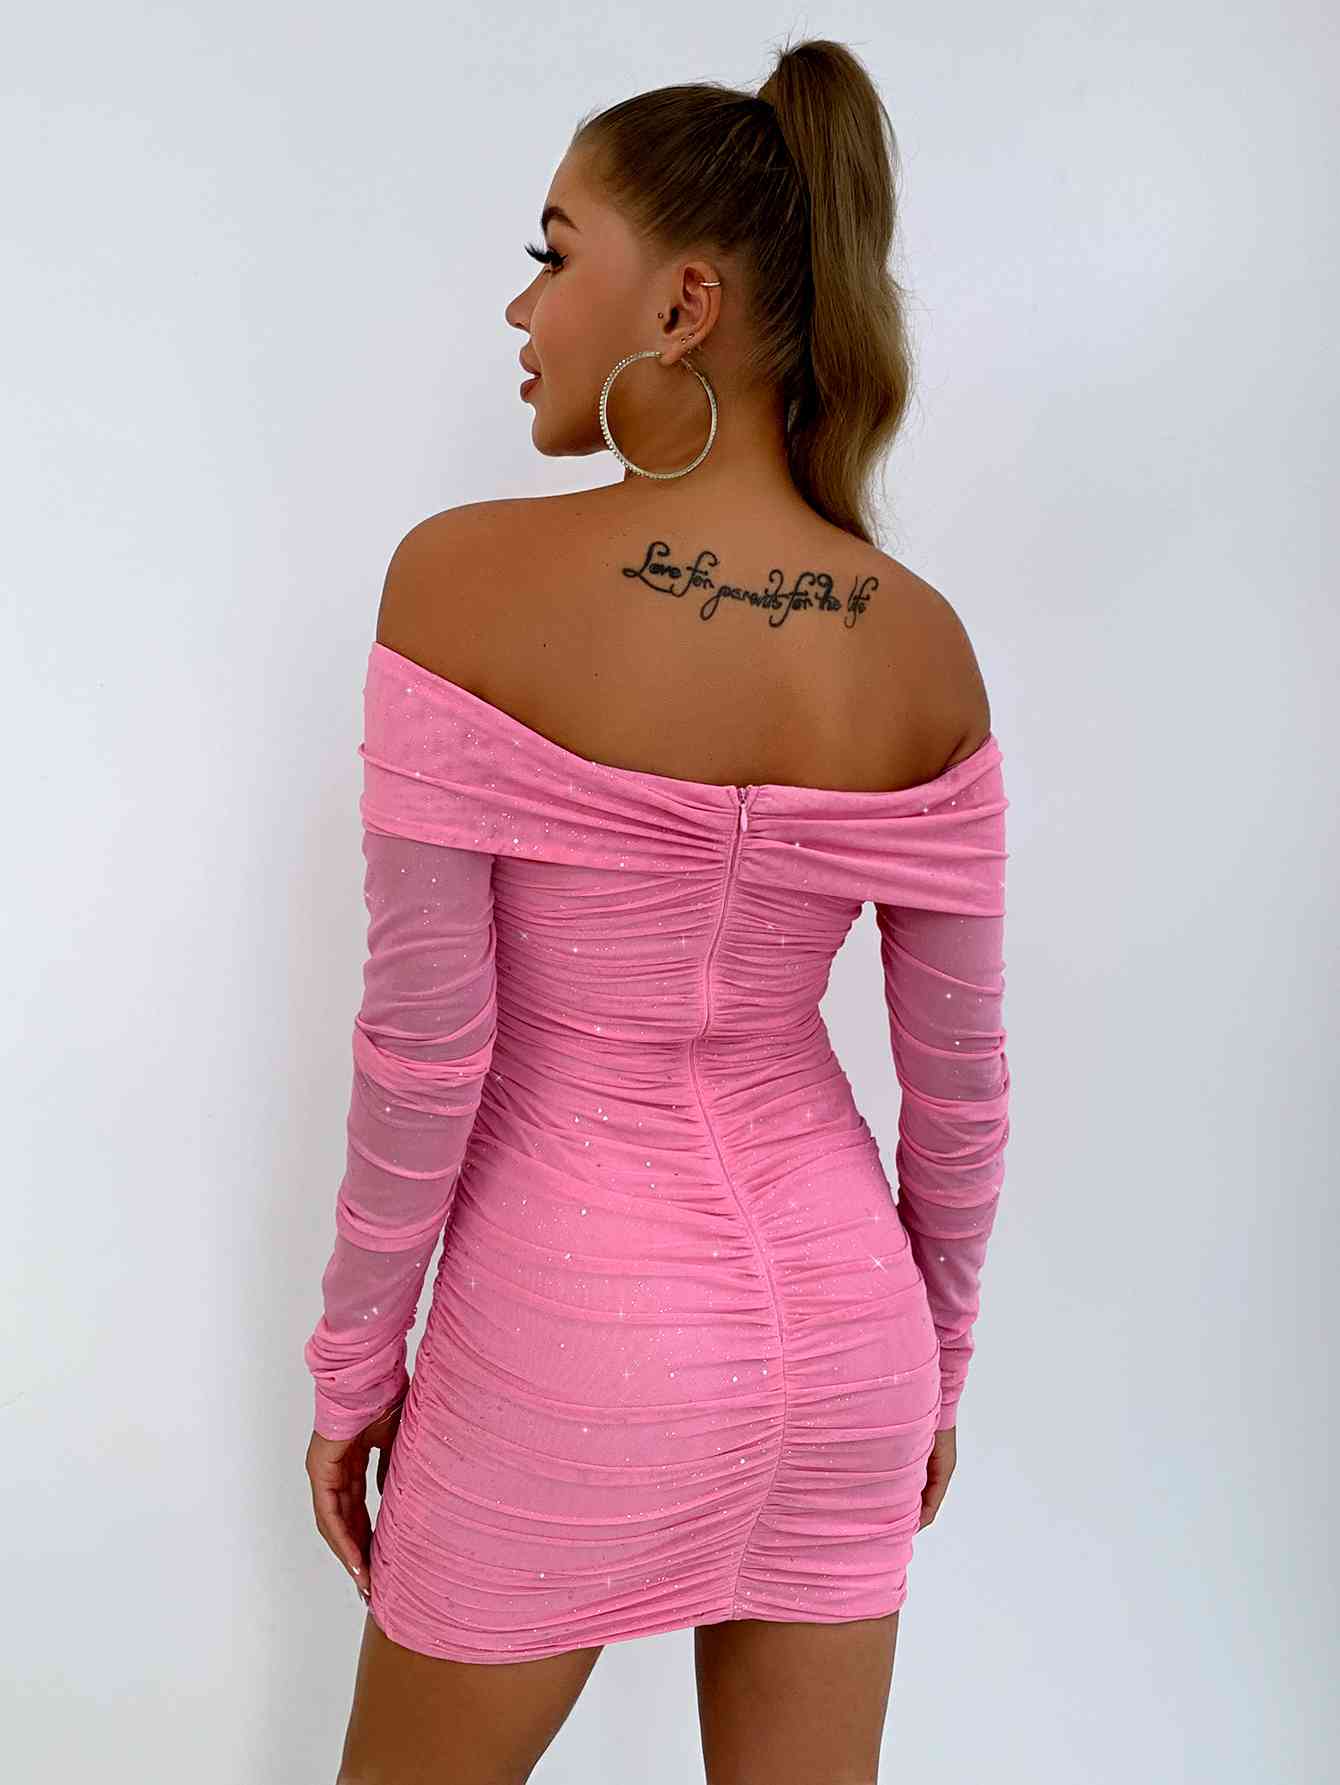 a woman in a pink dress with tattoos on her back